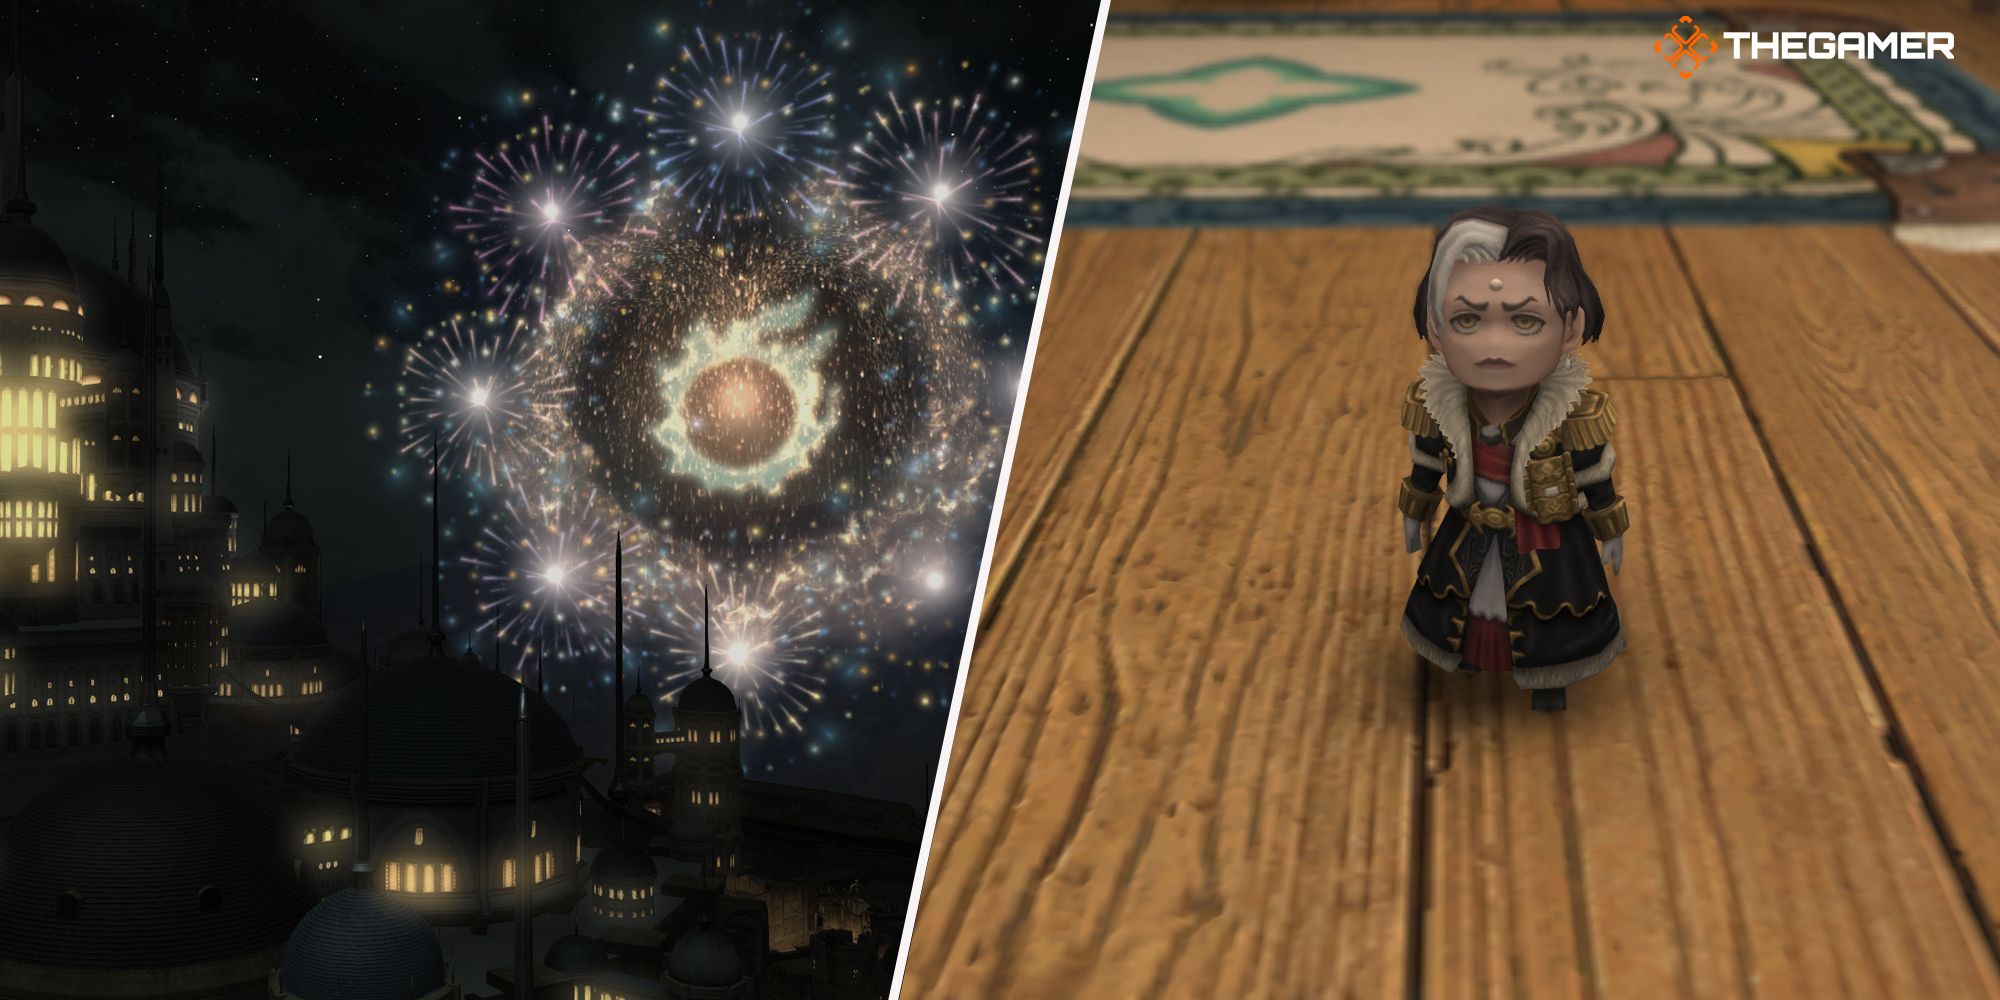 Final Fantasy 14 split image of The Rising fireworks and Clockwork Solus minion